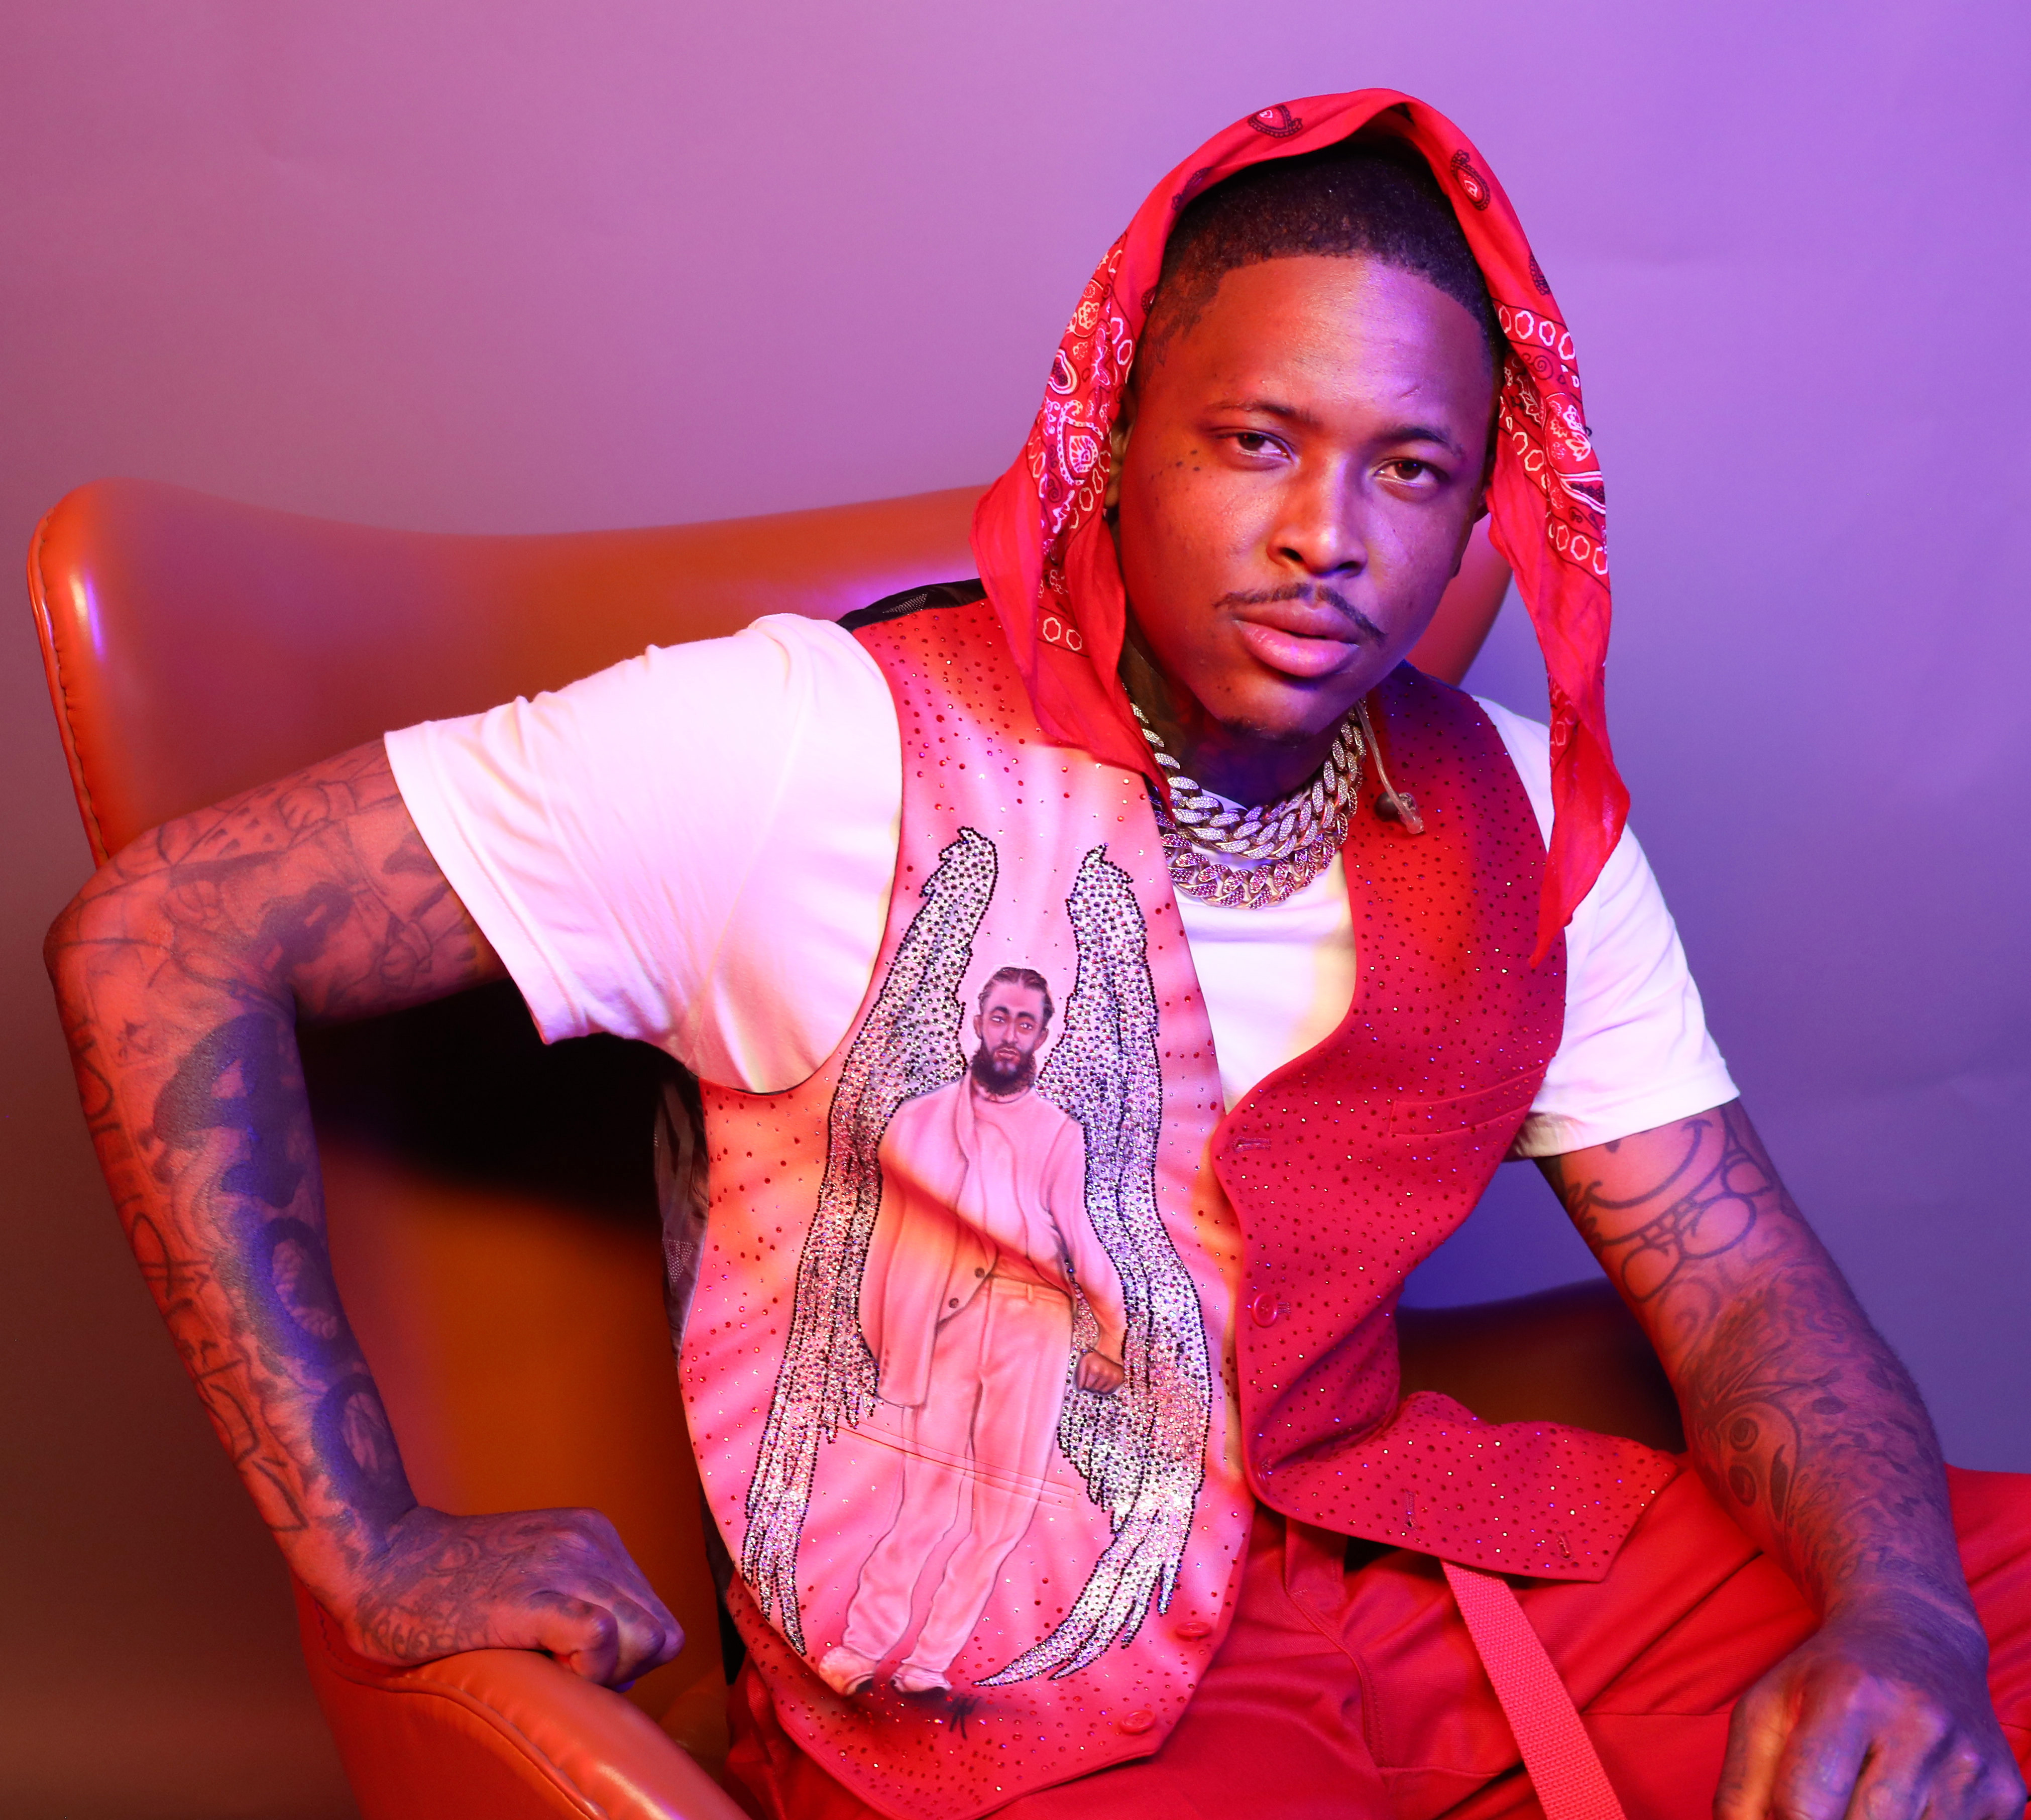 YG Shares Tracklist For Upcoming Album, “I Got Issues”